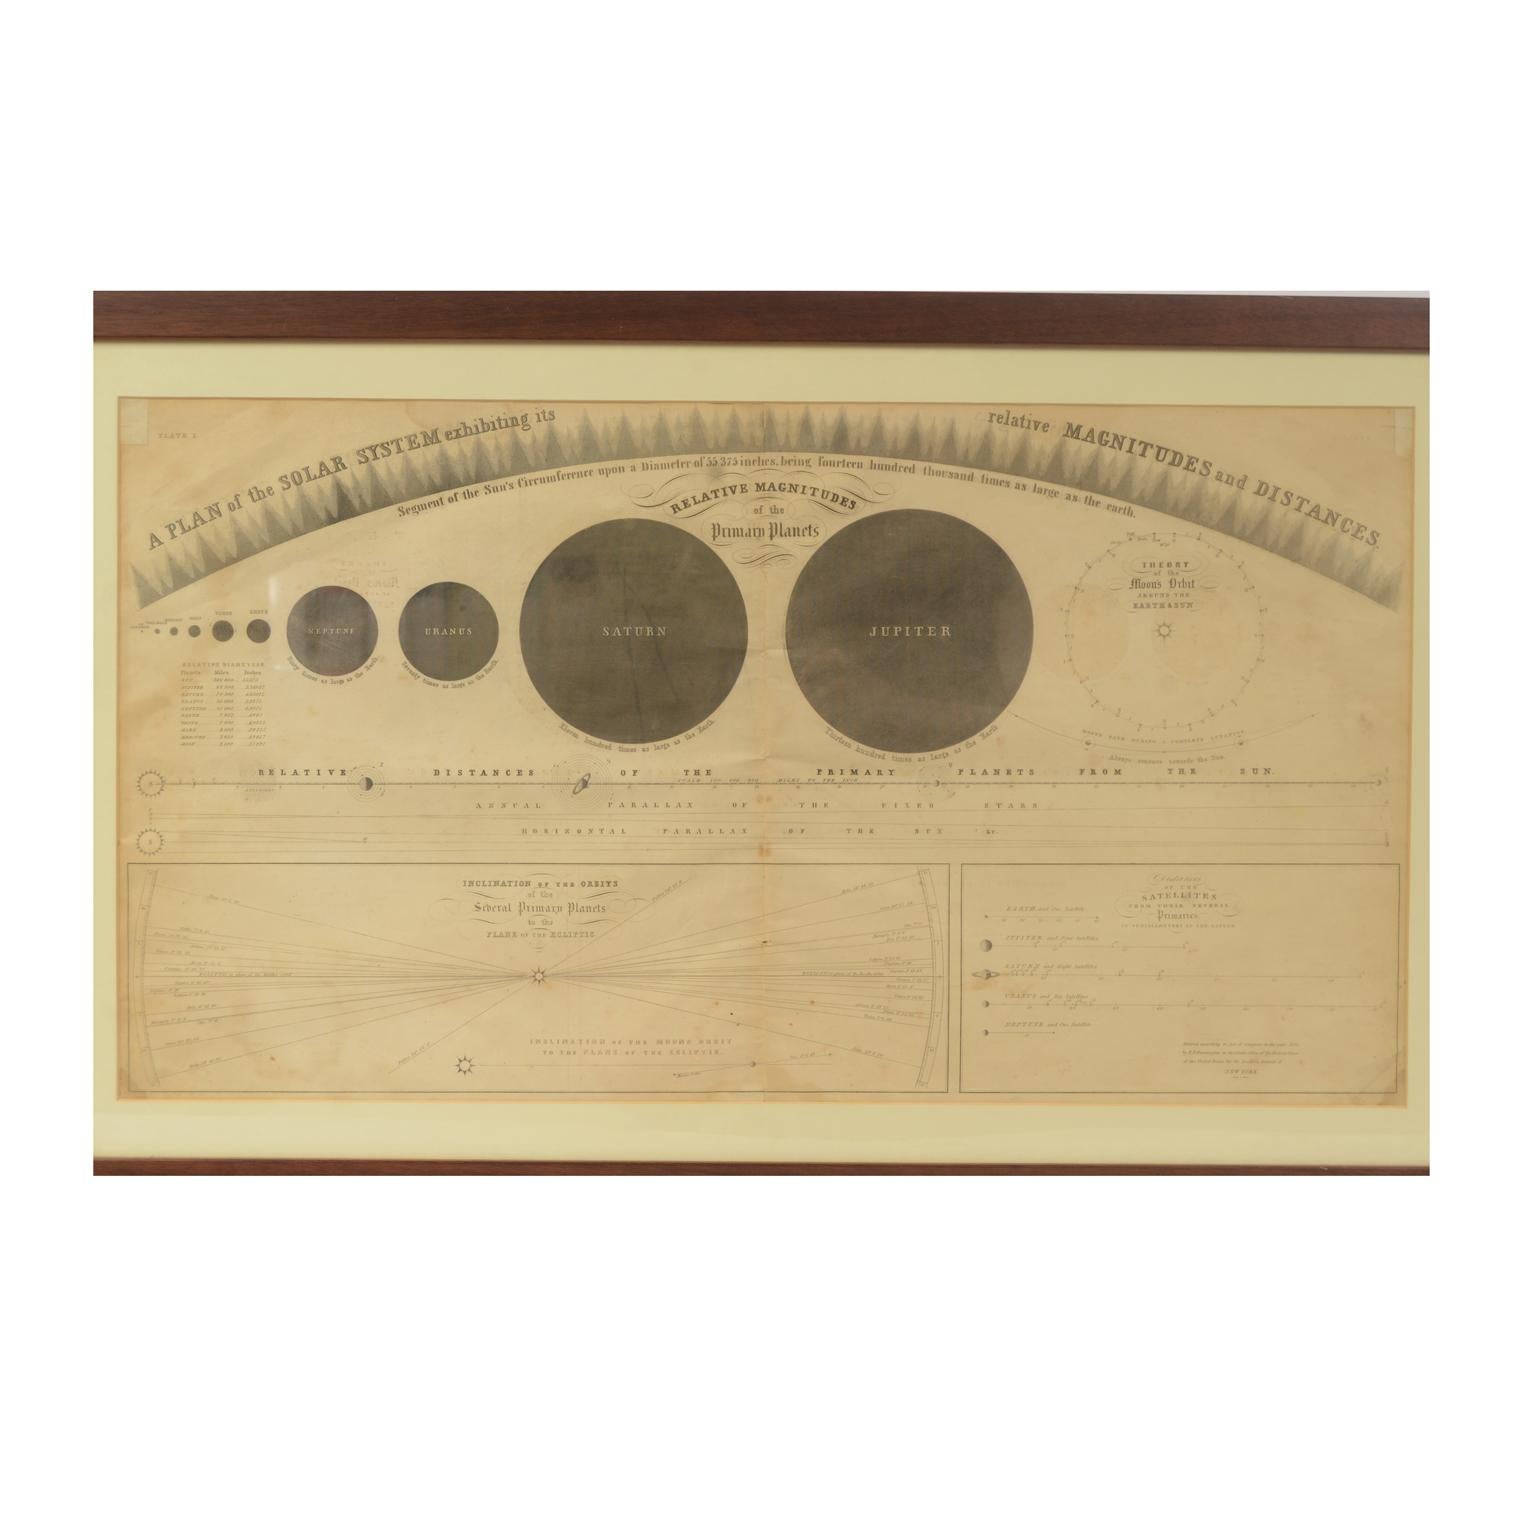 Plate of the distance of the planets “Entered according to Act of Congress in the year 1855 by F.J. Huntington in the Clerk's Office of the District Court of the United States for the Southern District of New York